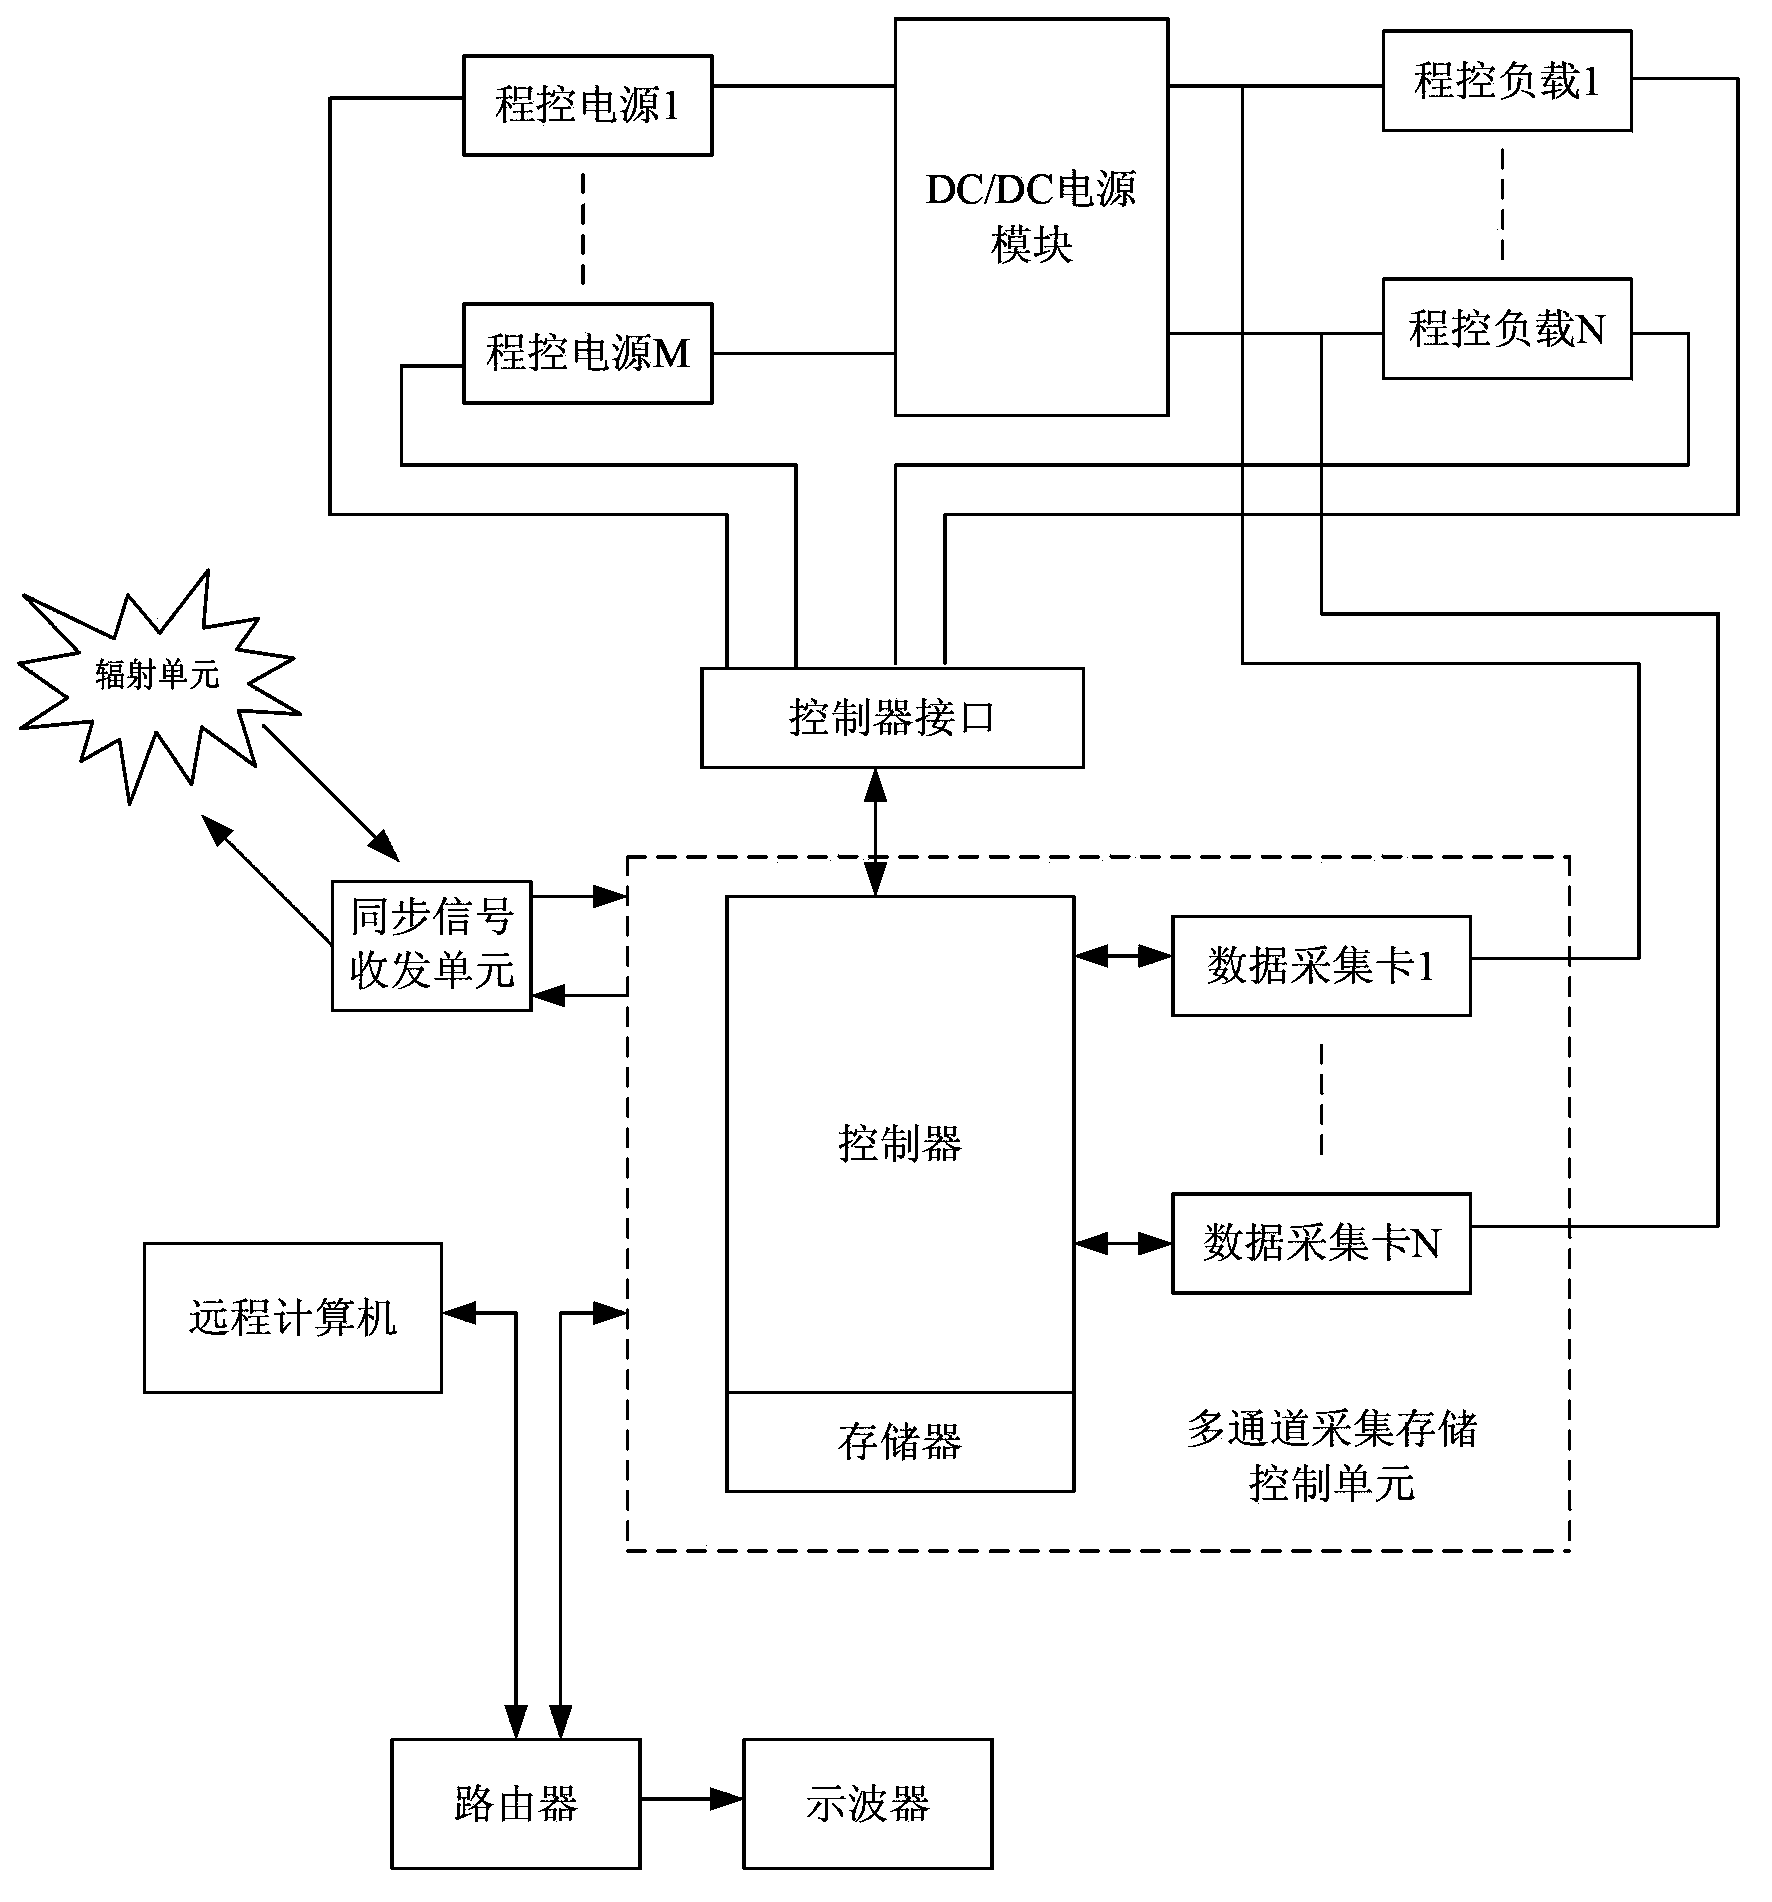 Radiation effect measurement and control system of DC-DC (Direct Current-Direct Current) power module